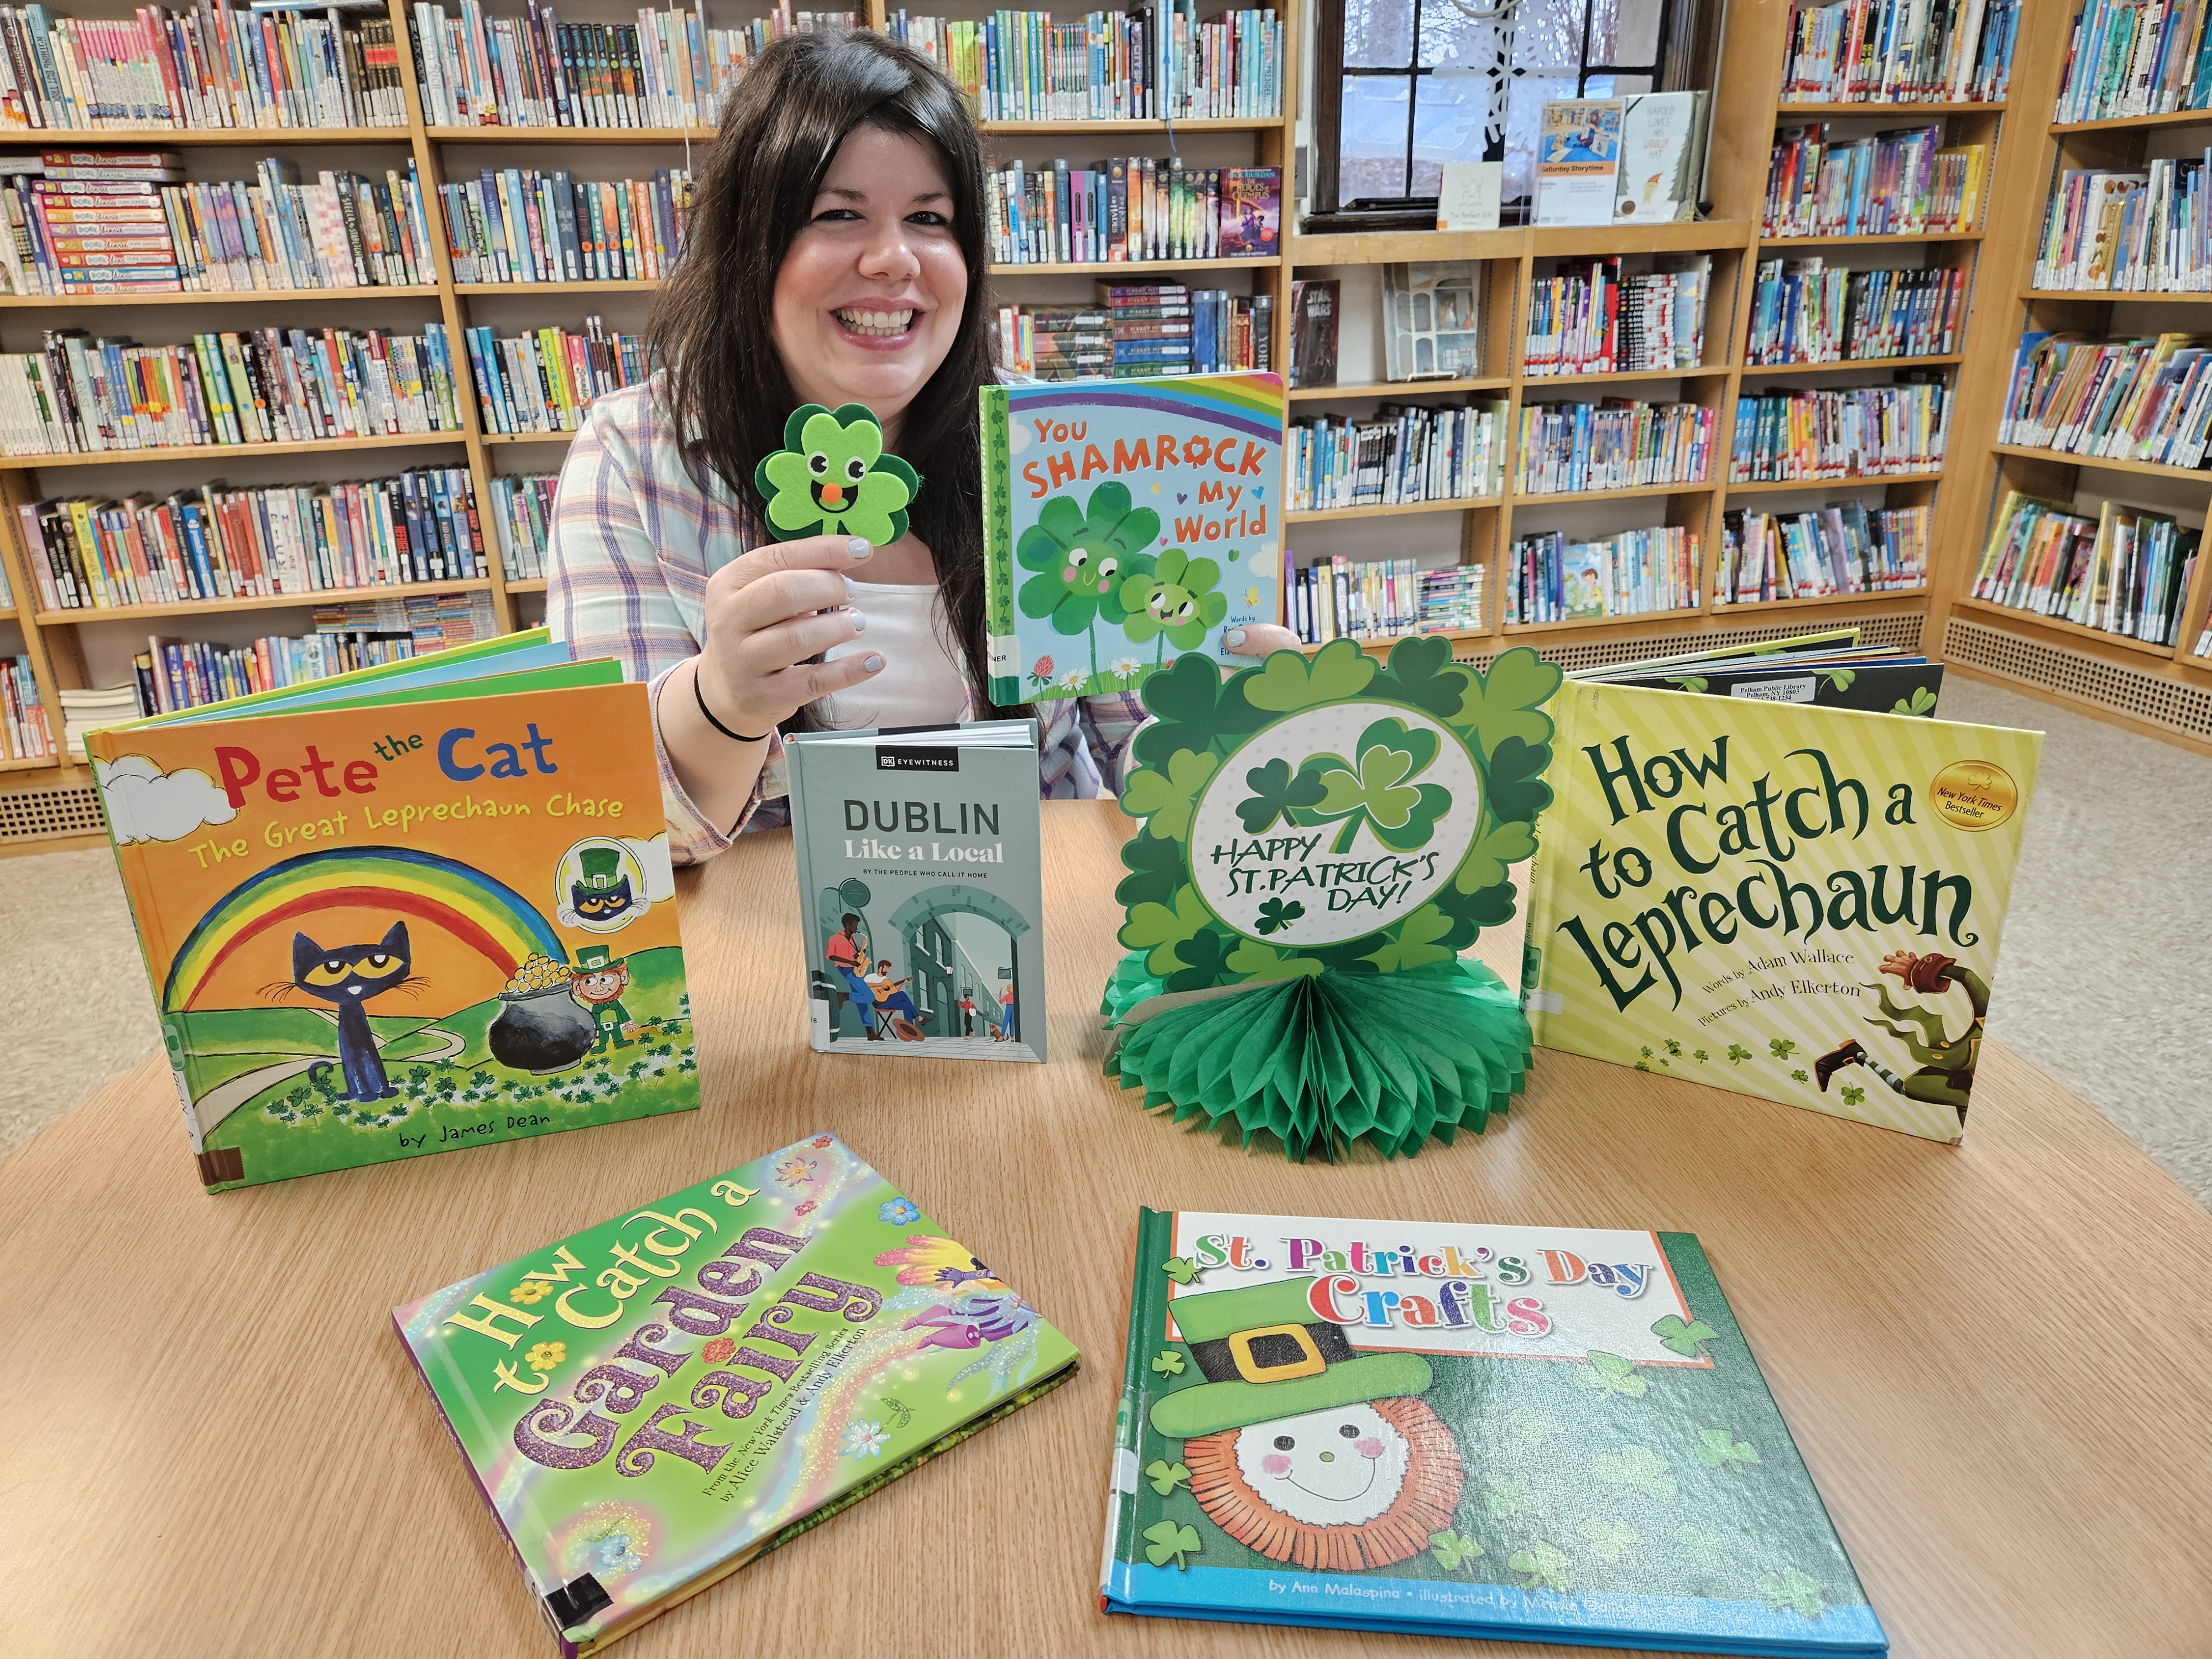 Image of Erin with St. Patrick's Day Books